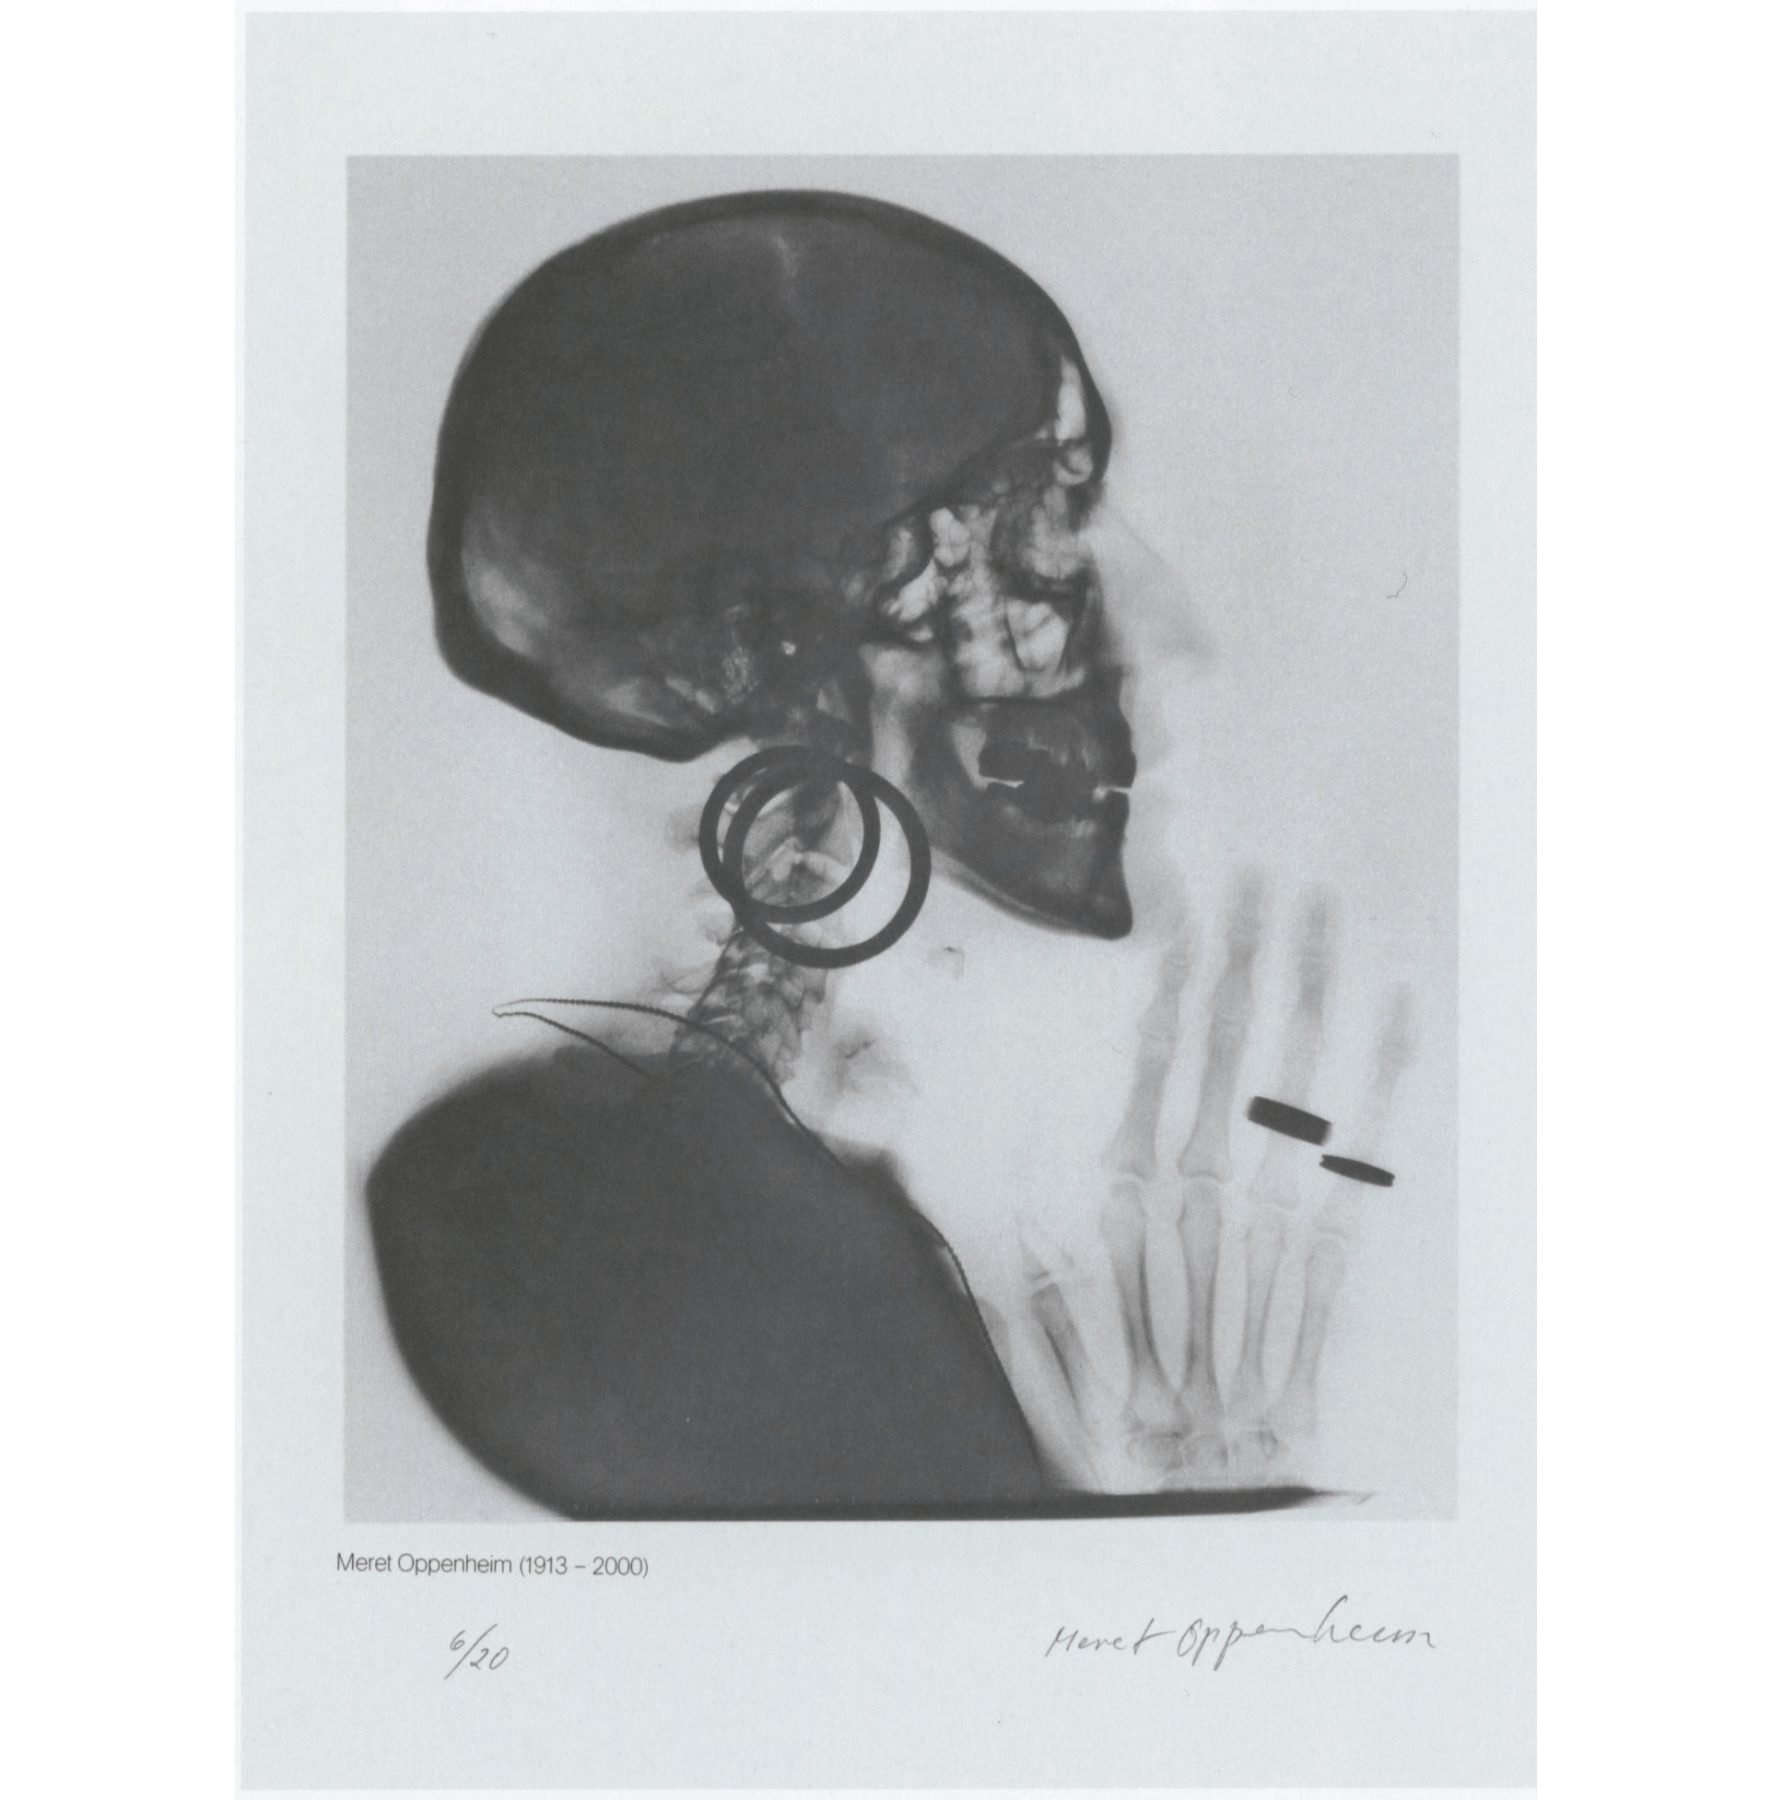 X-Ray of Meret Oppenheim's Skull - From the Research Department - Viewing Room - From the Research Department